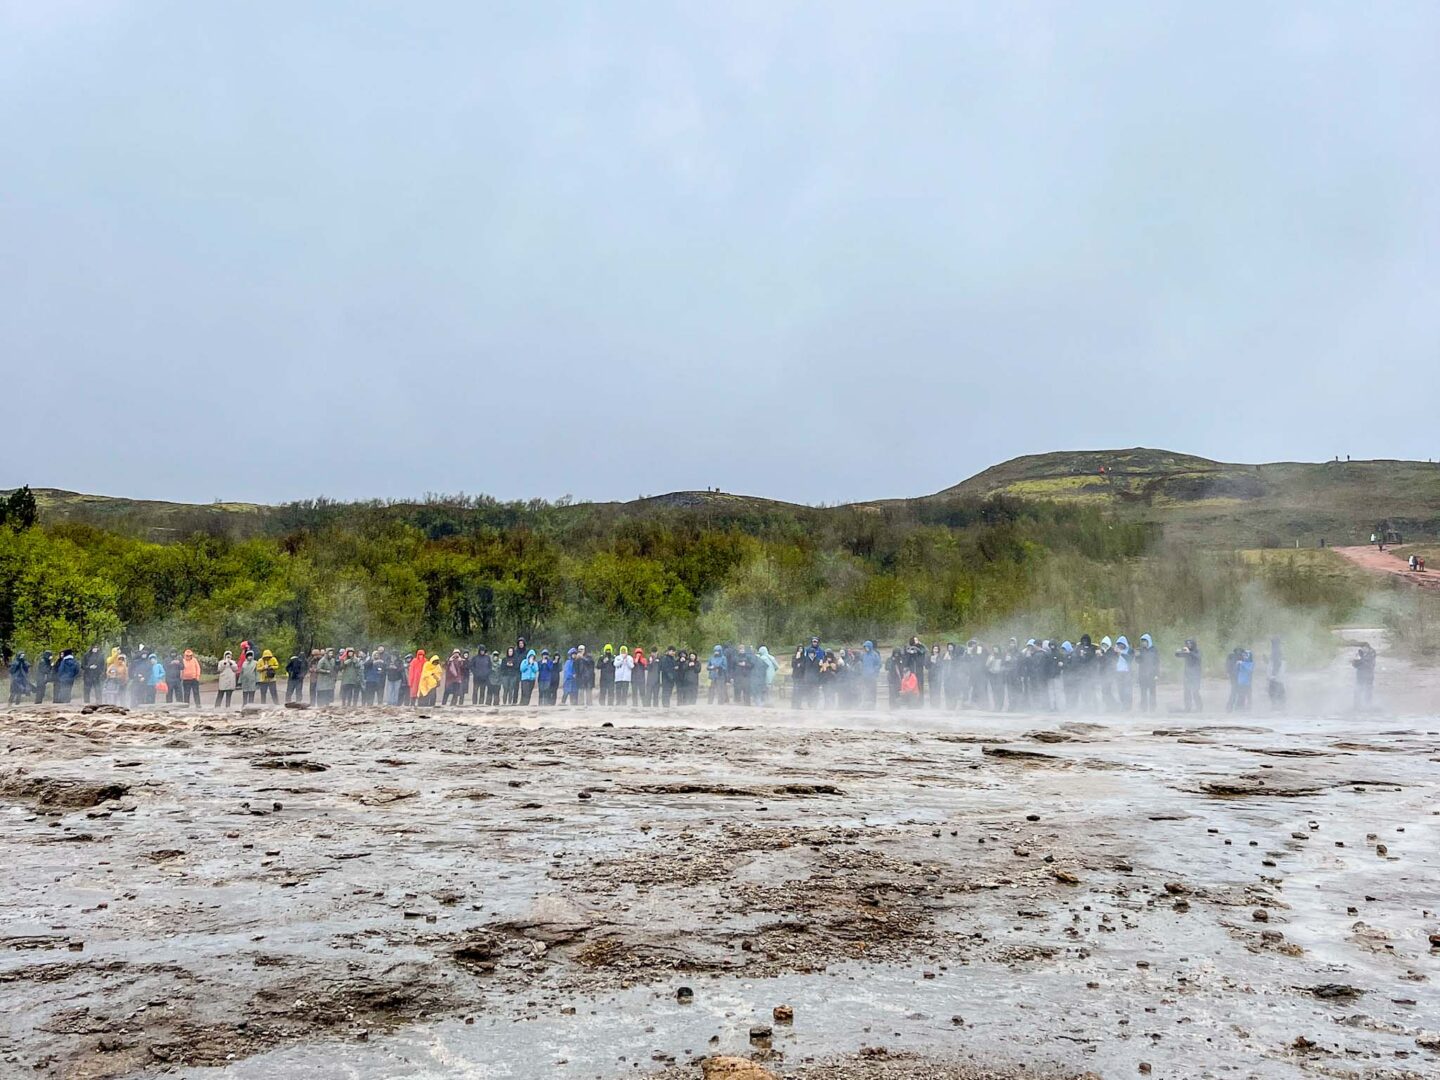 Iceland in May and June, crowds at the Geysers in Iceland in May